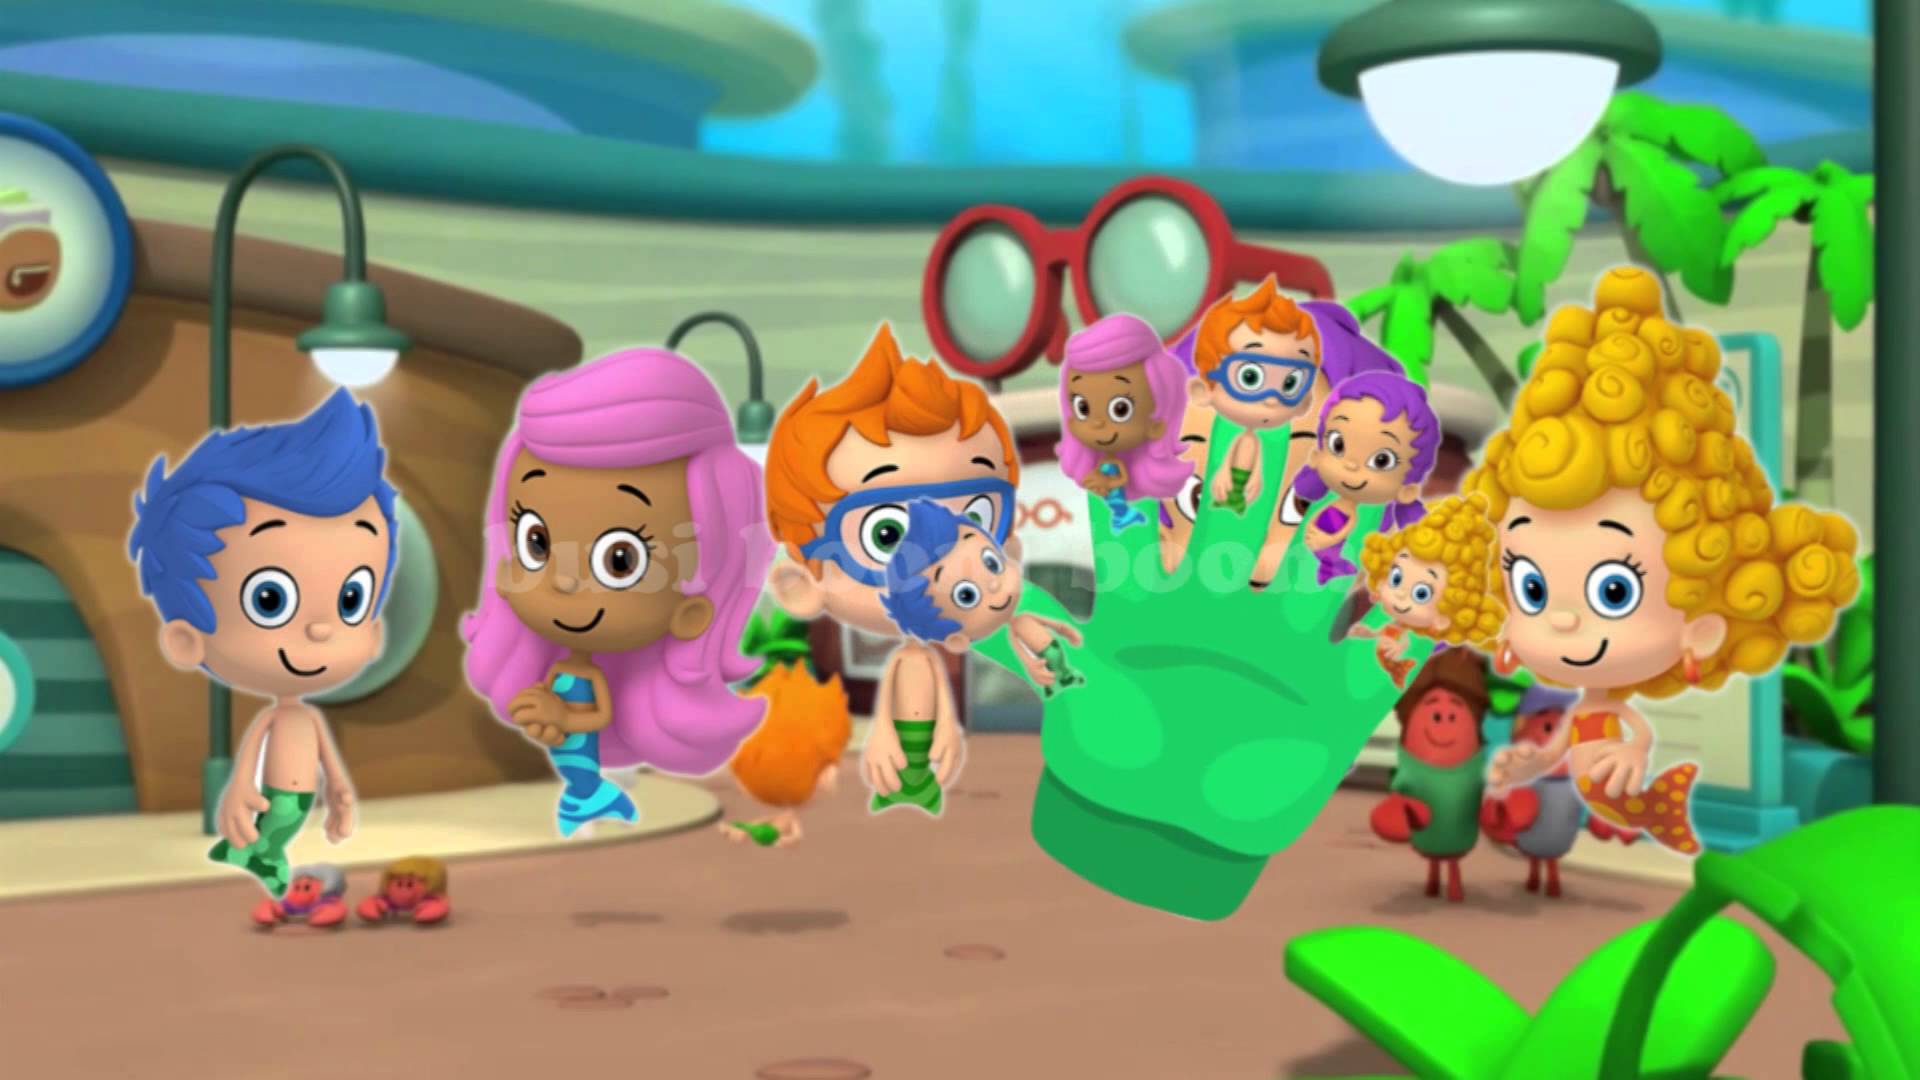 Bubble Guppies Finger Family Nursery Rhyme.